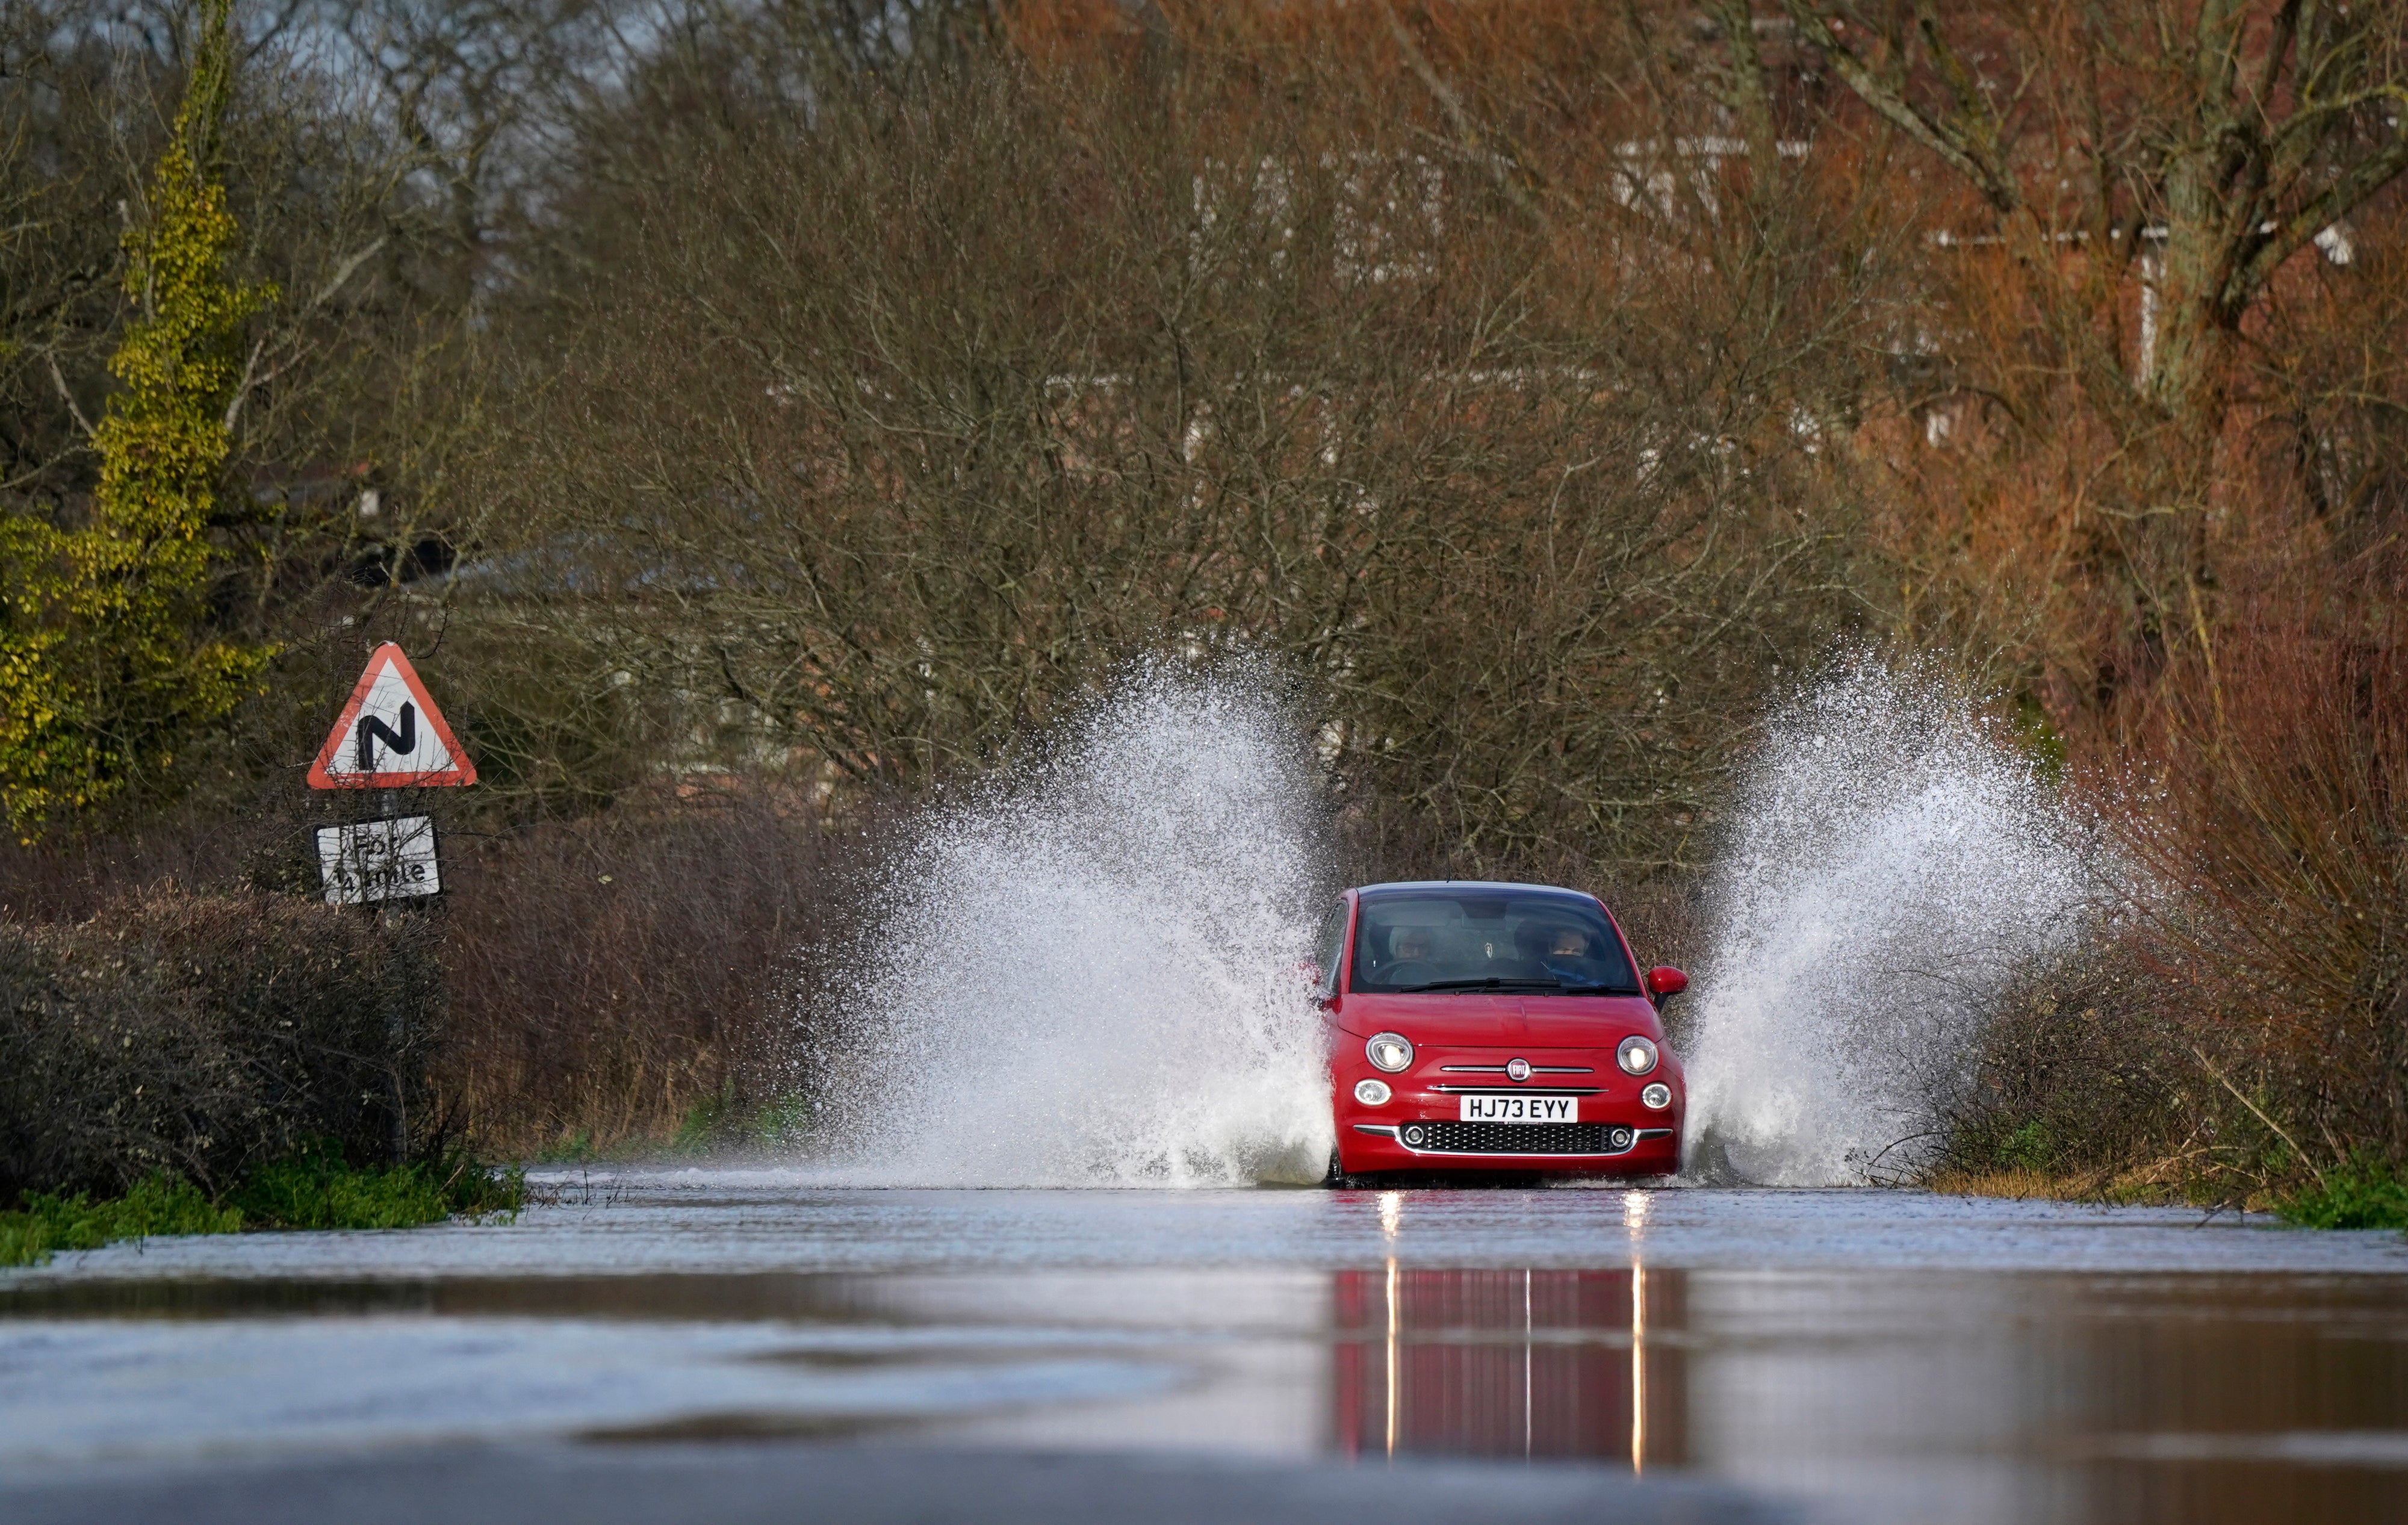 A car drives through floodwater in Harbridge, Hampshire